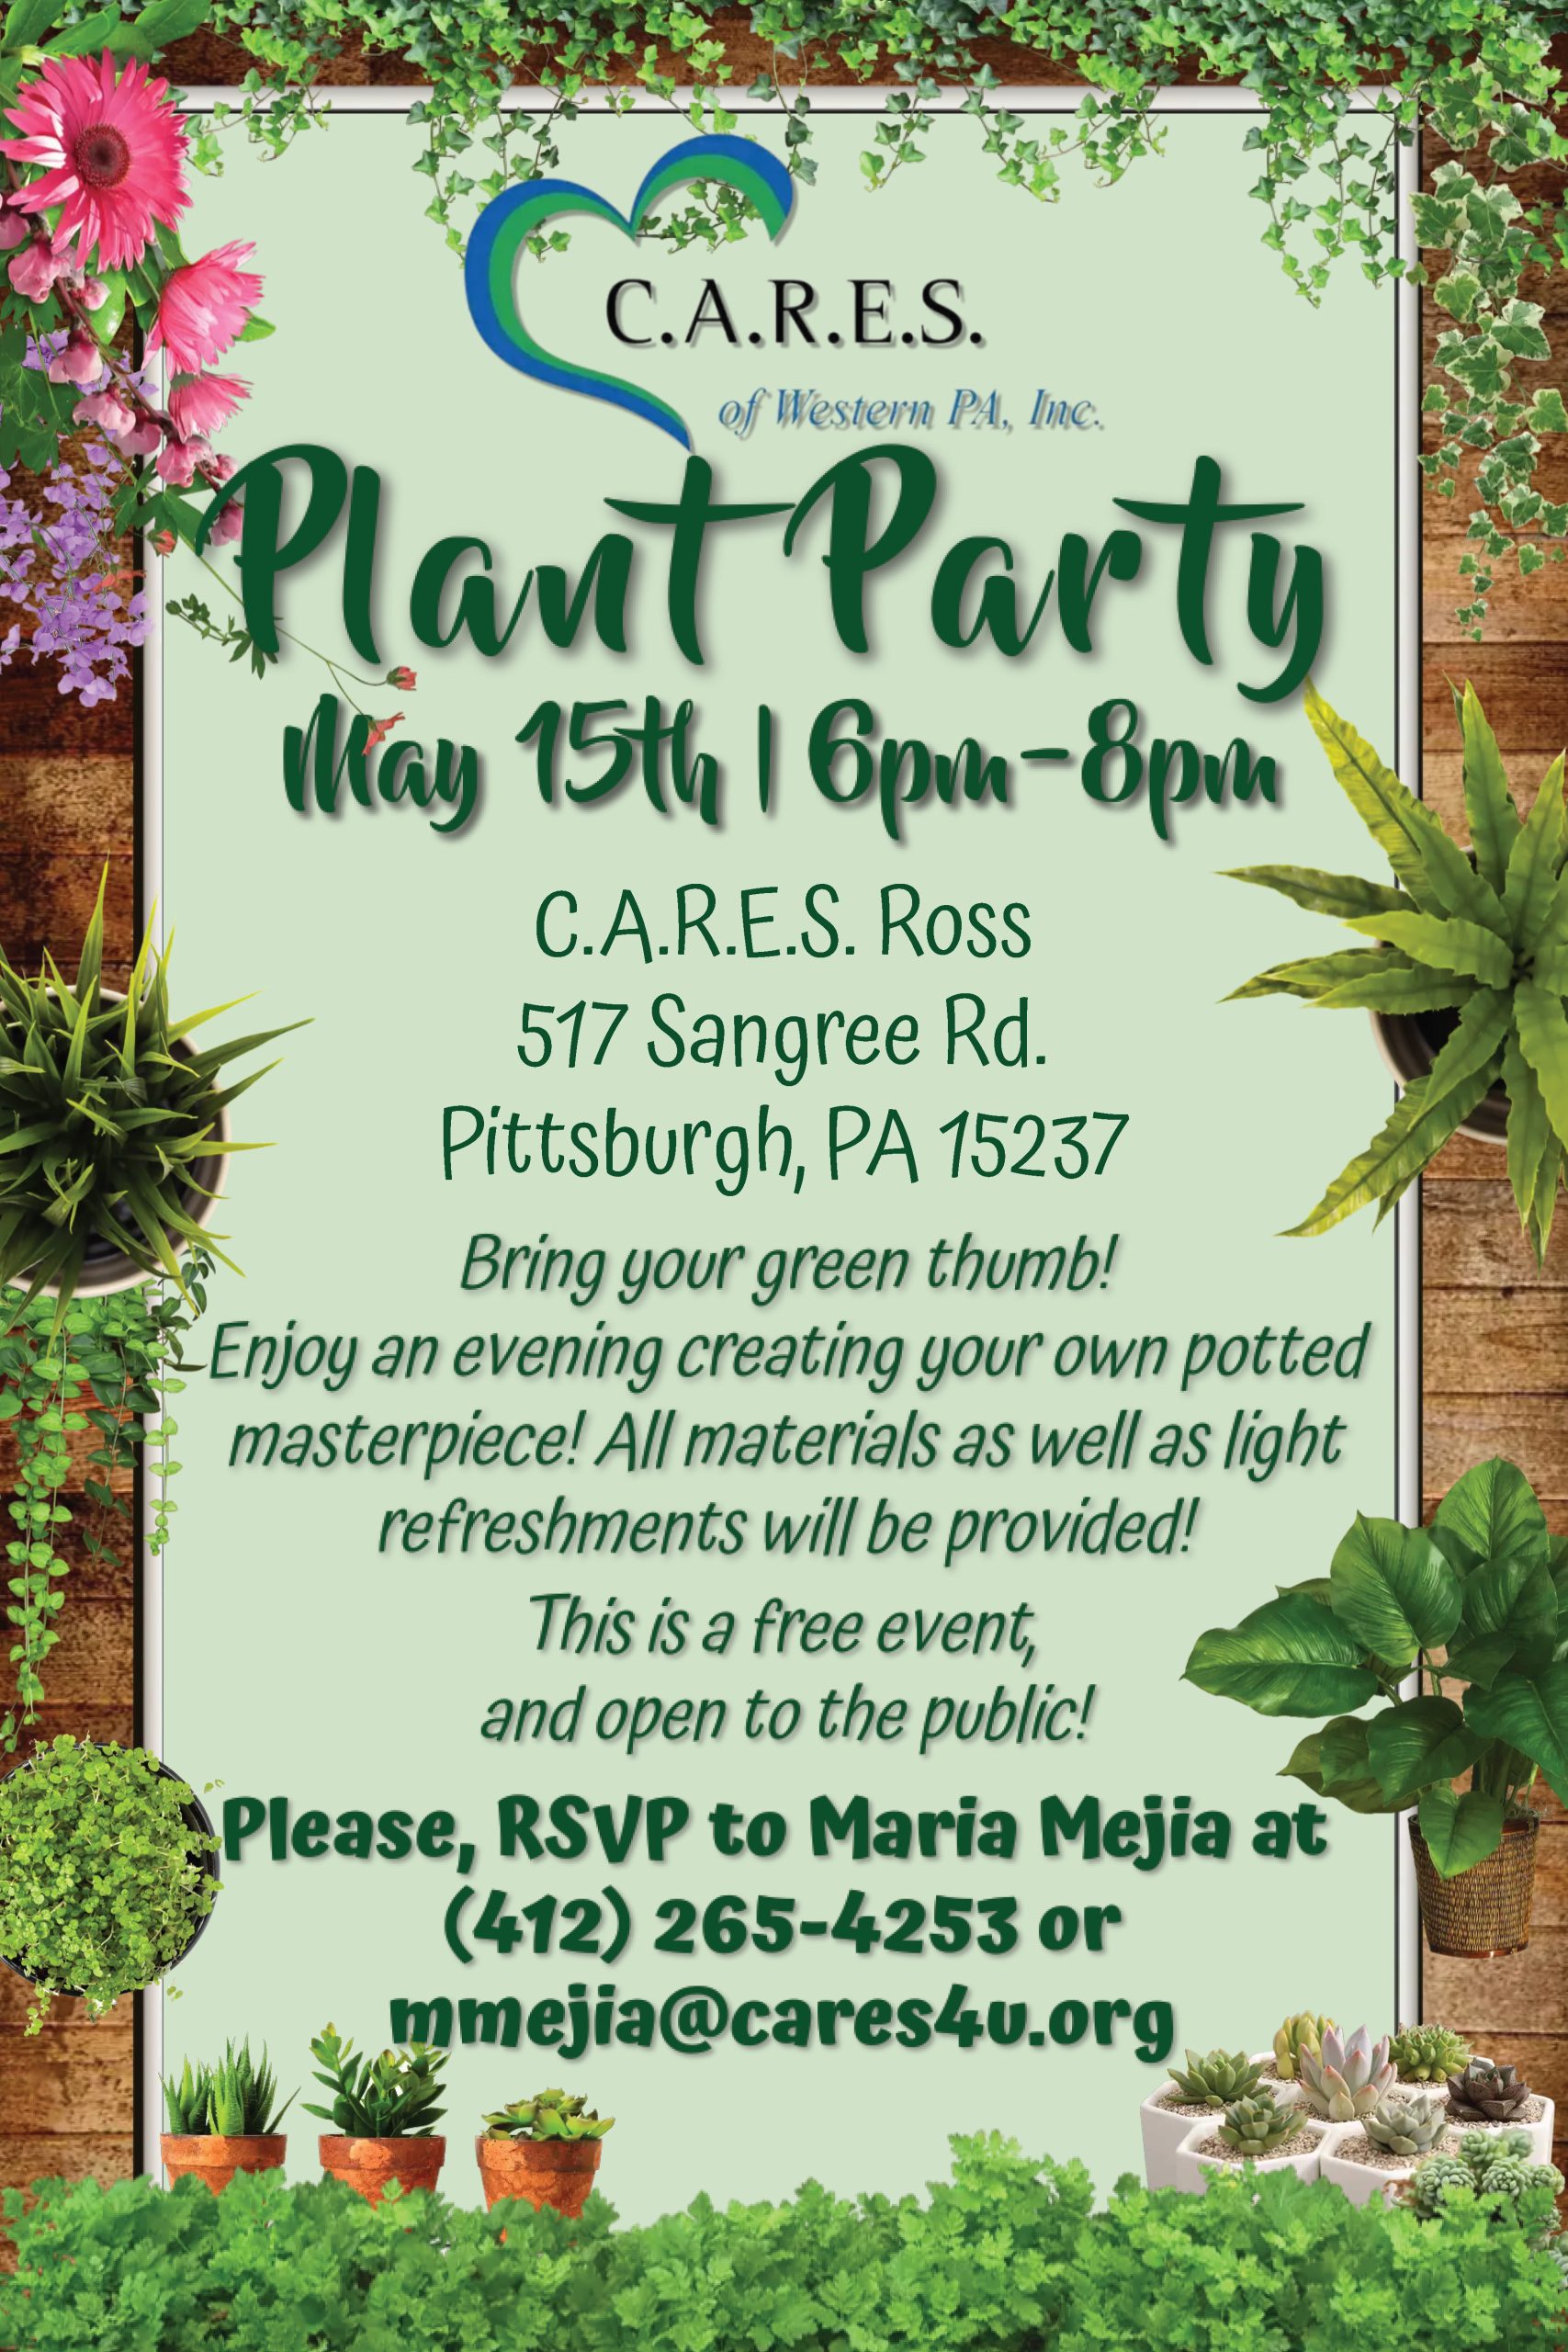 C.A.R.E.S. Plant Party - Pittsburgh 3